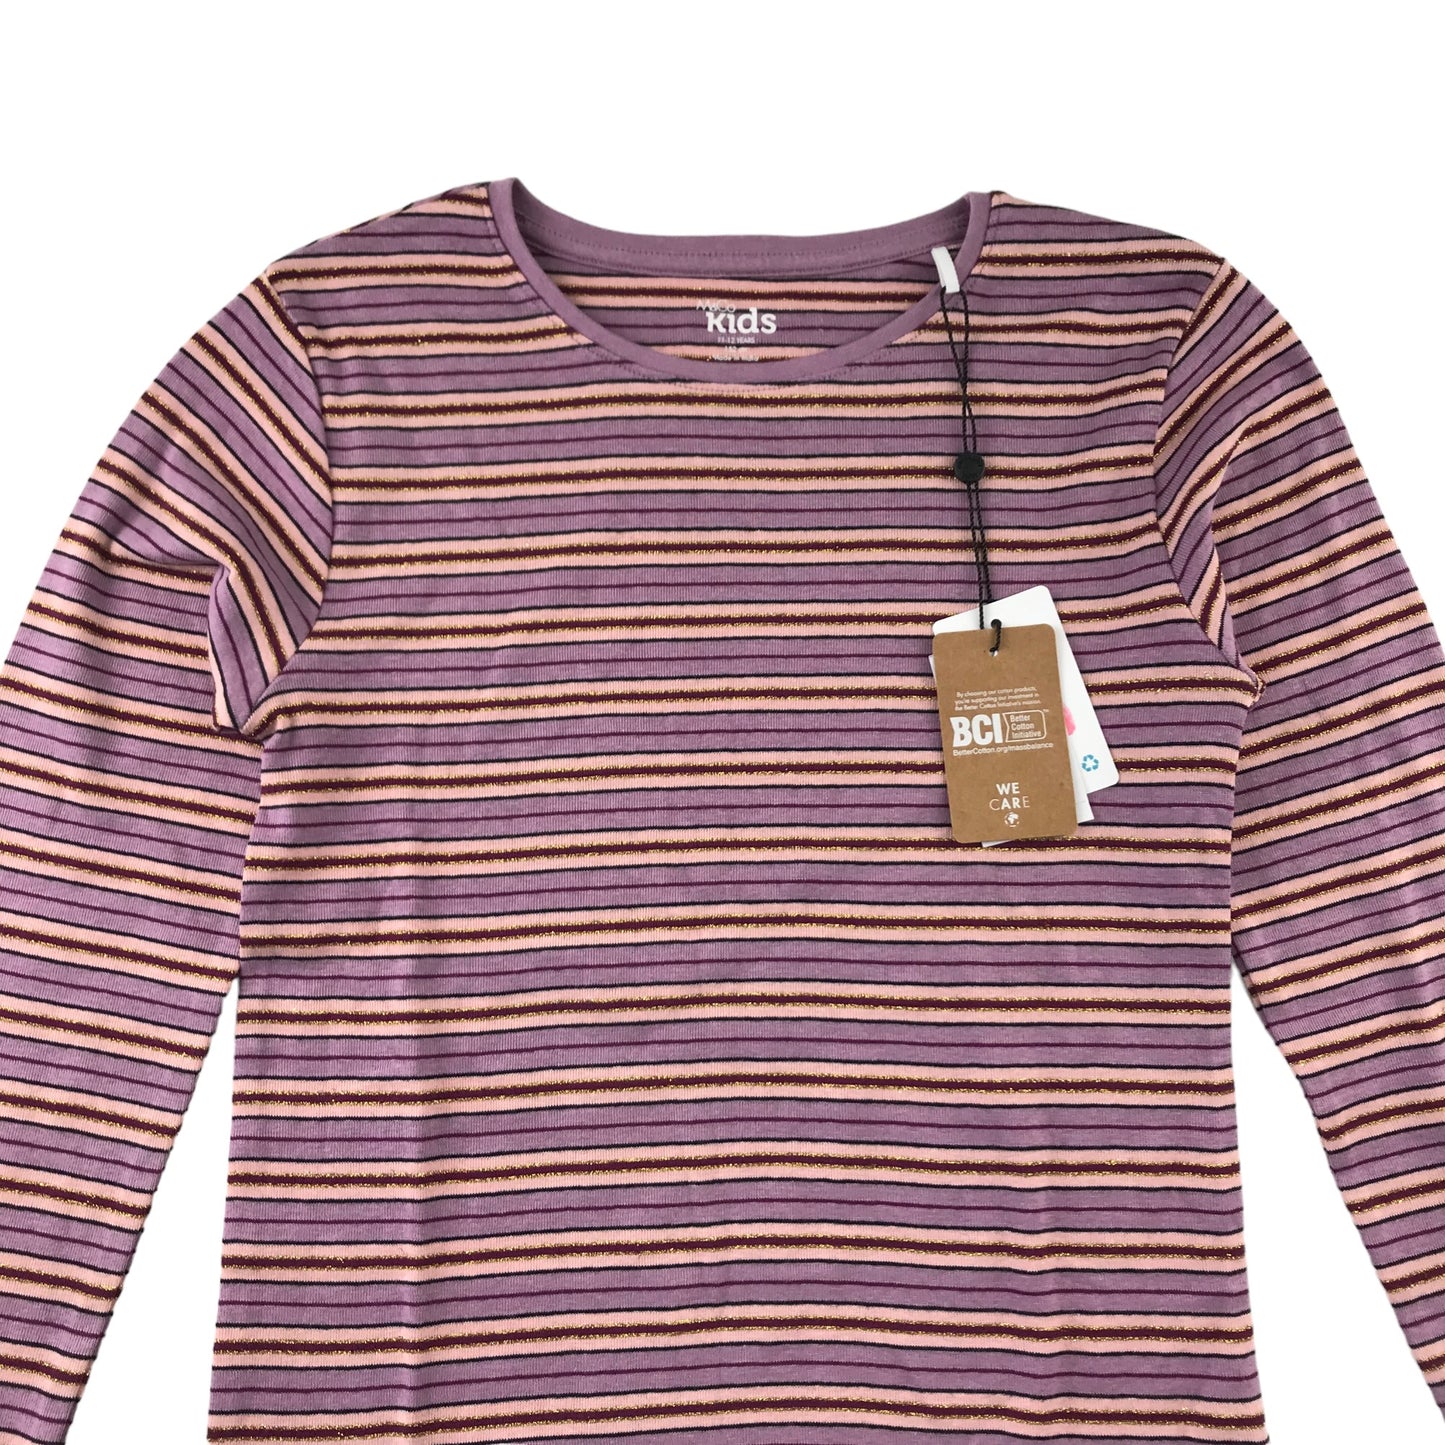 M&Co T-Shirt Age 11 Purple and Peachy Pink Sparkly Stripy